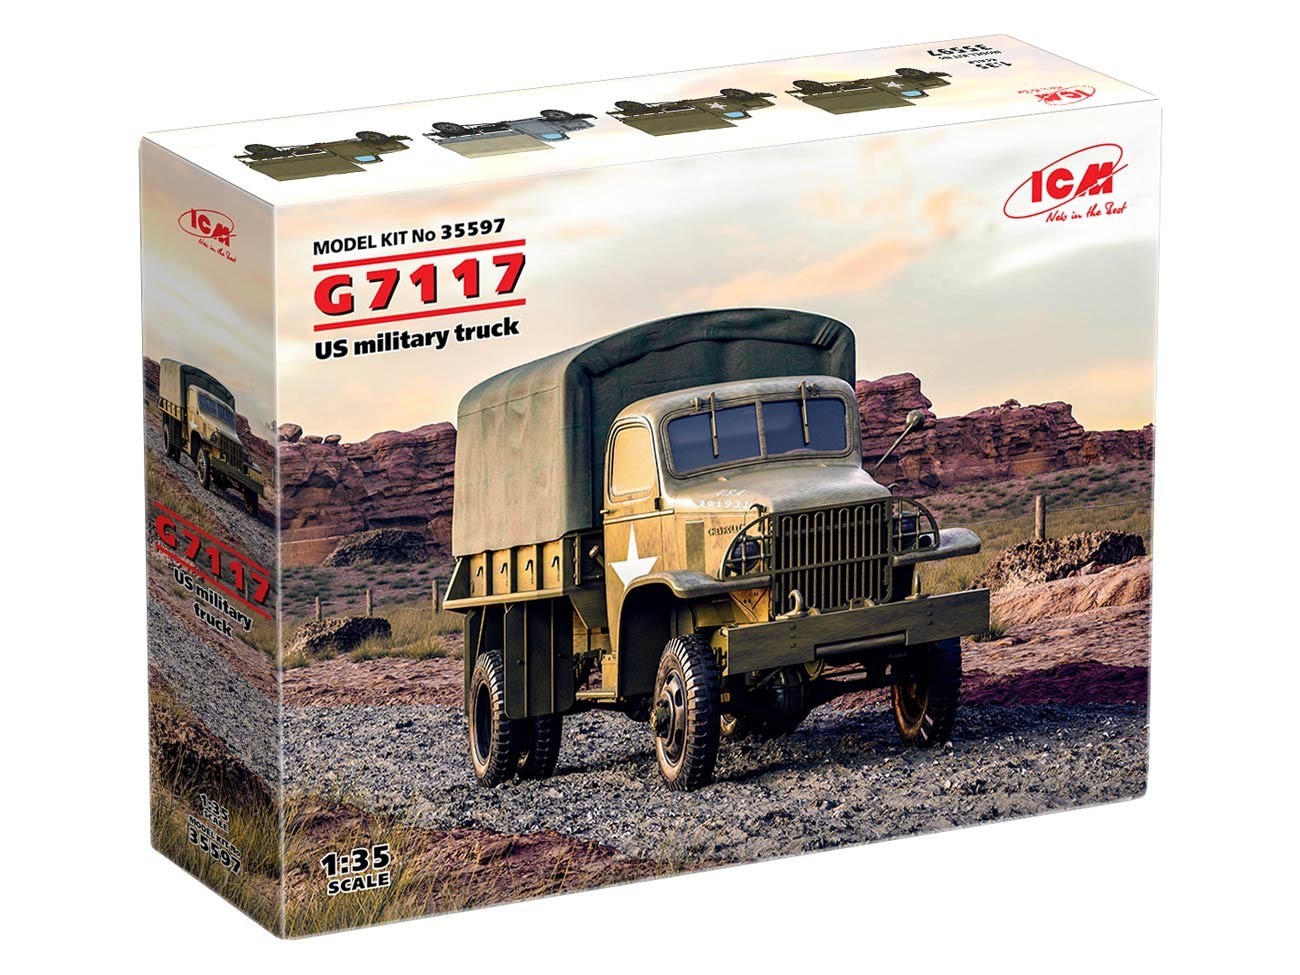 G7117, US military truck